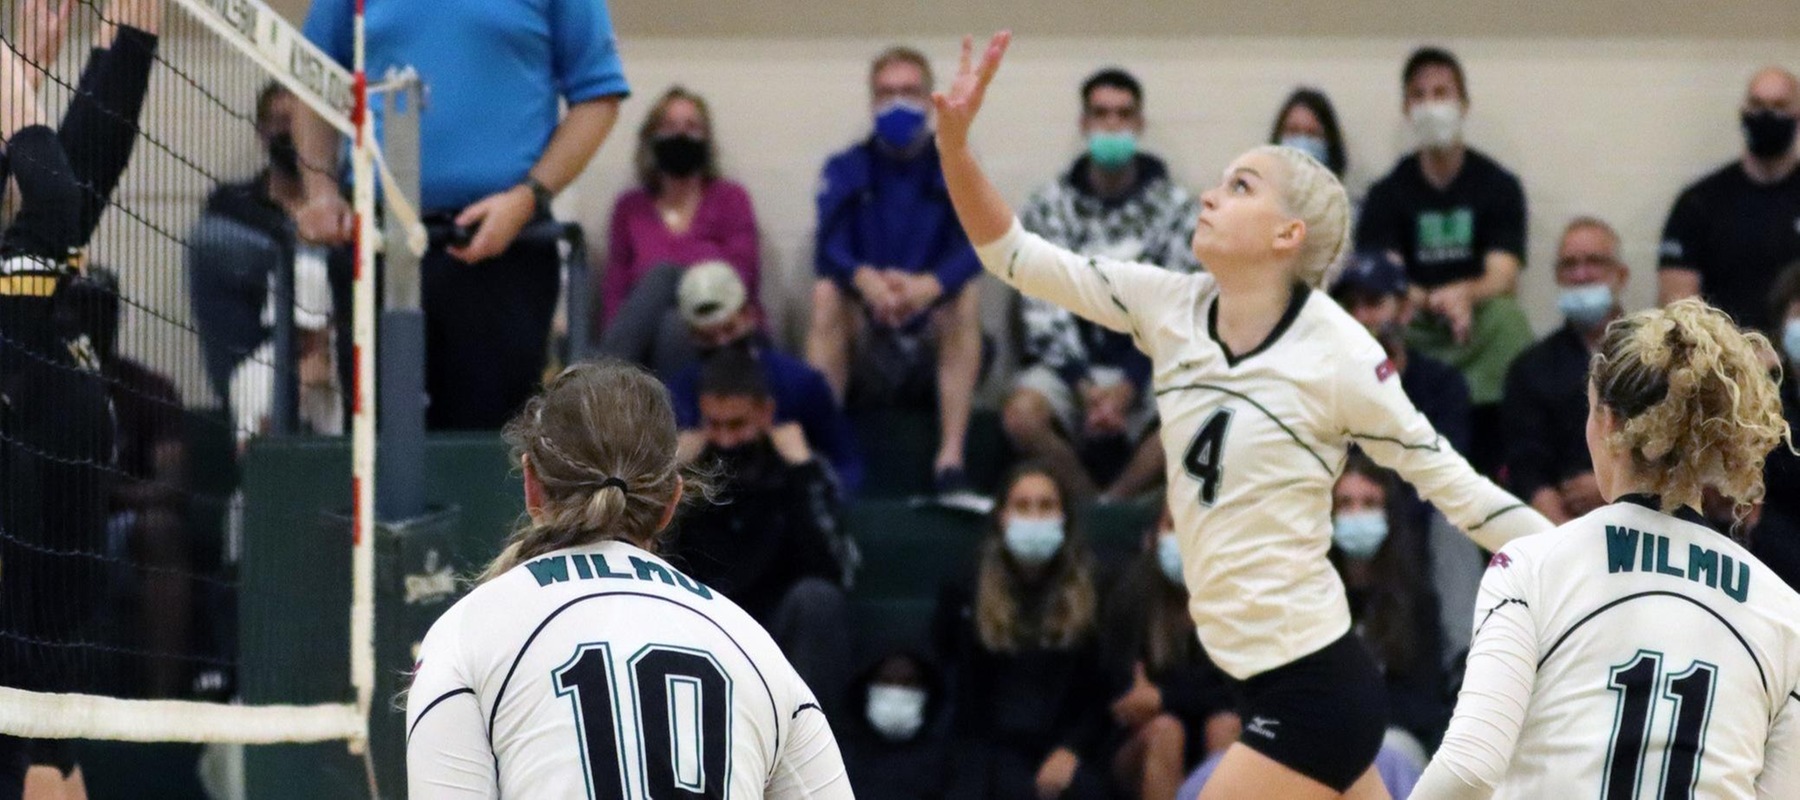 File photo of Mandy Behiels who led the Wildcats with 12 kills and 14 digs at Dominican. Copyright 2021; Wilmington University. All rights reserved. Photo by Dan Lauletta. October 23, 2021 vs. Millersville